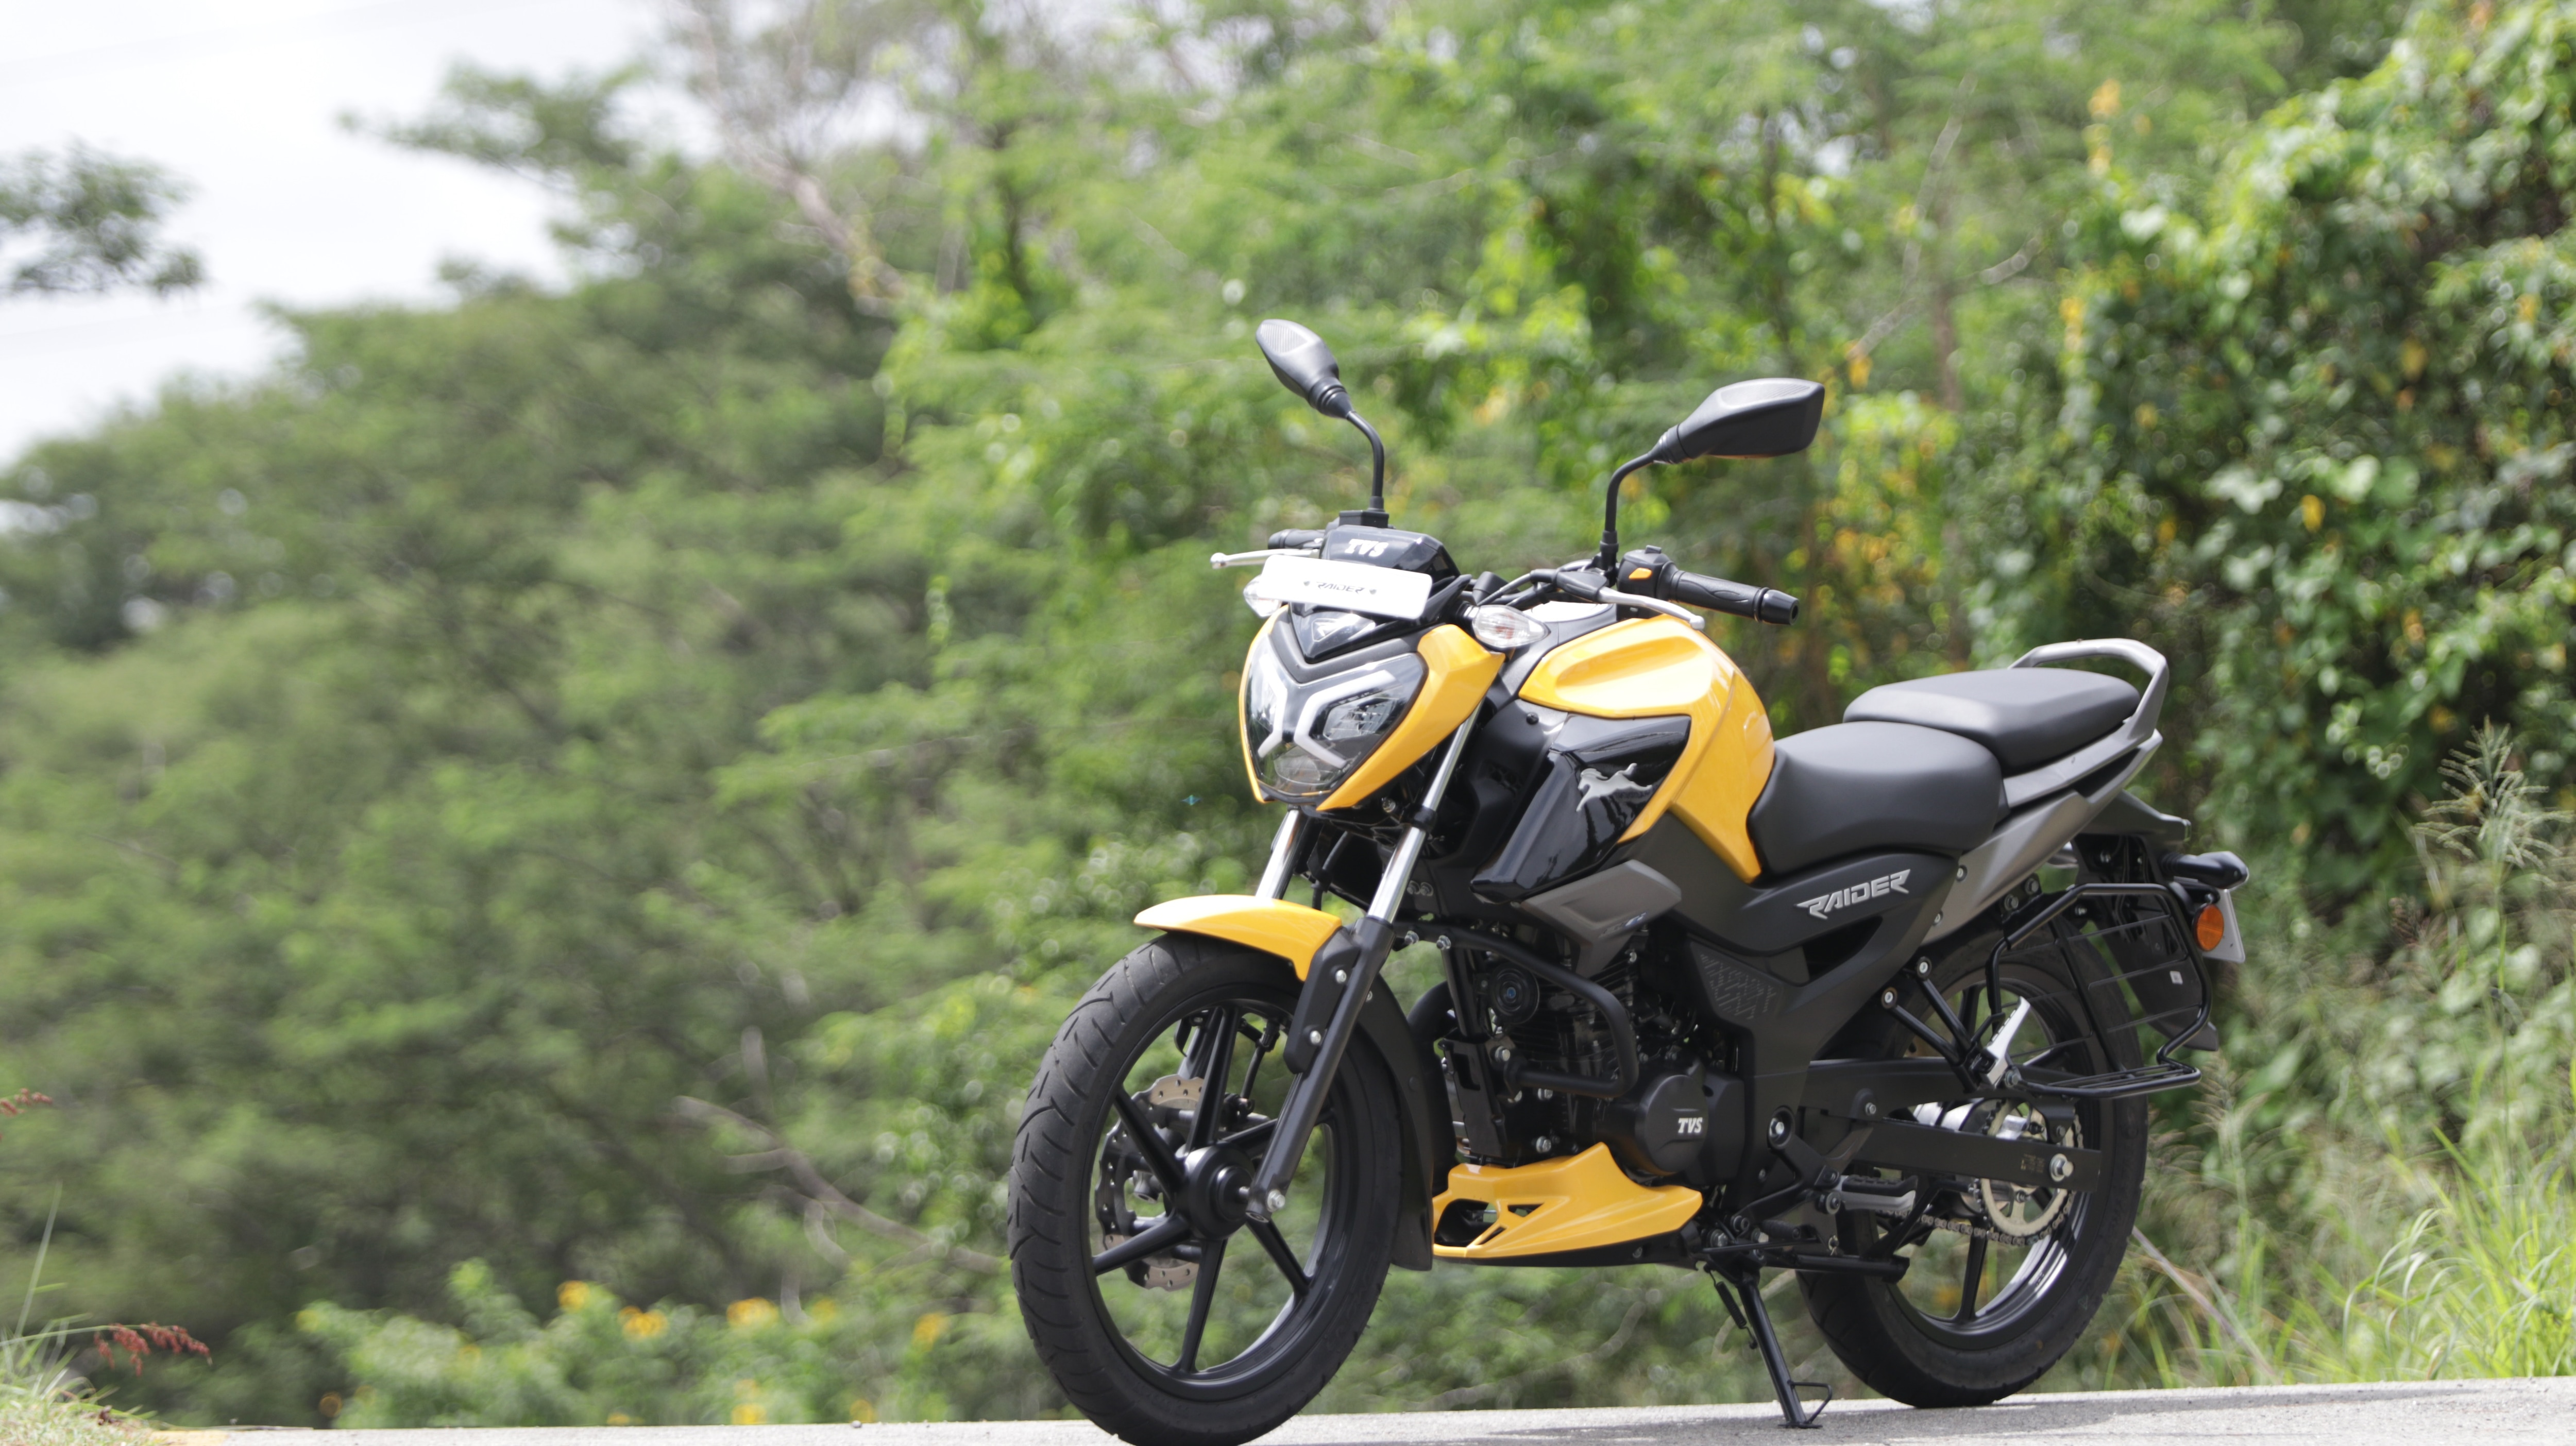 In Pics: 2021 TVS Raider track test review: Sporty commuter on a budget